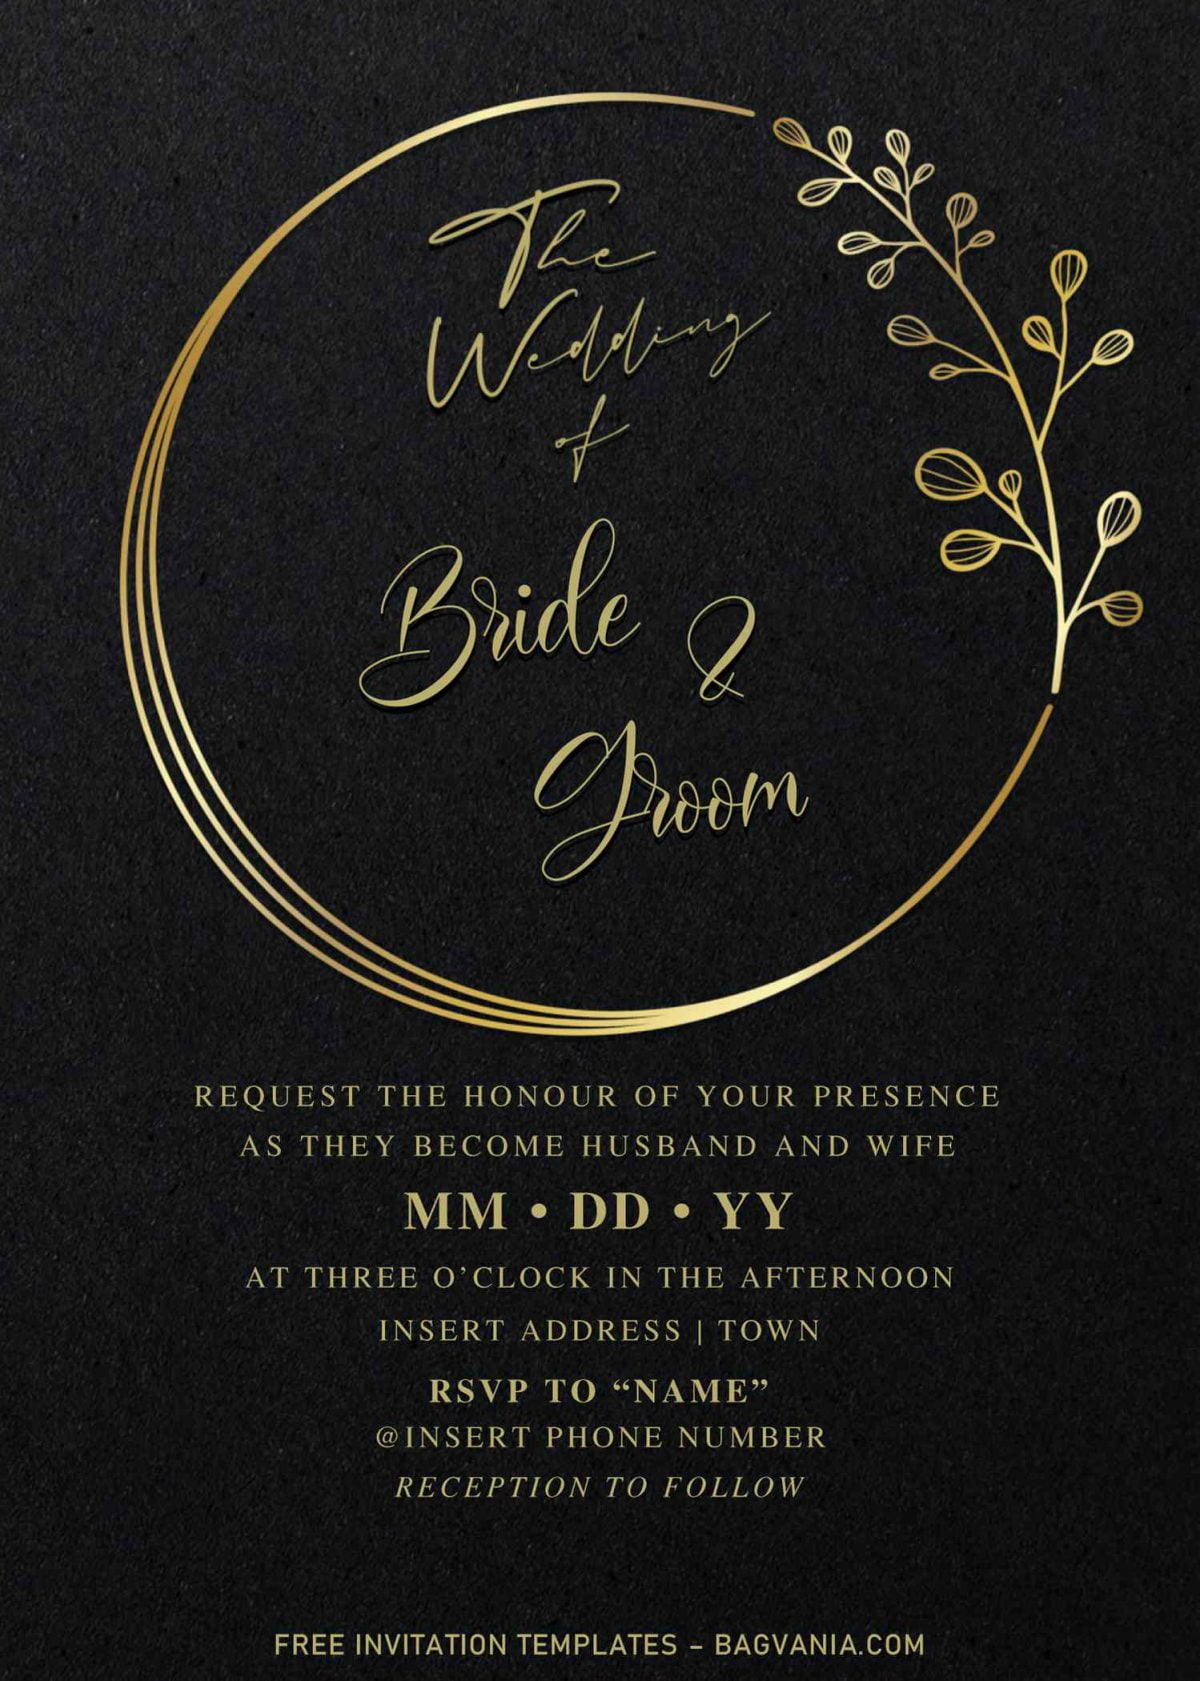 Free Elegant Black And Gold Wedding Invitation Templates For Word and has 